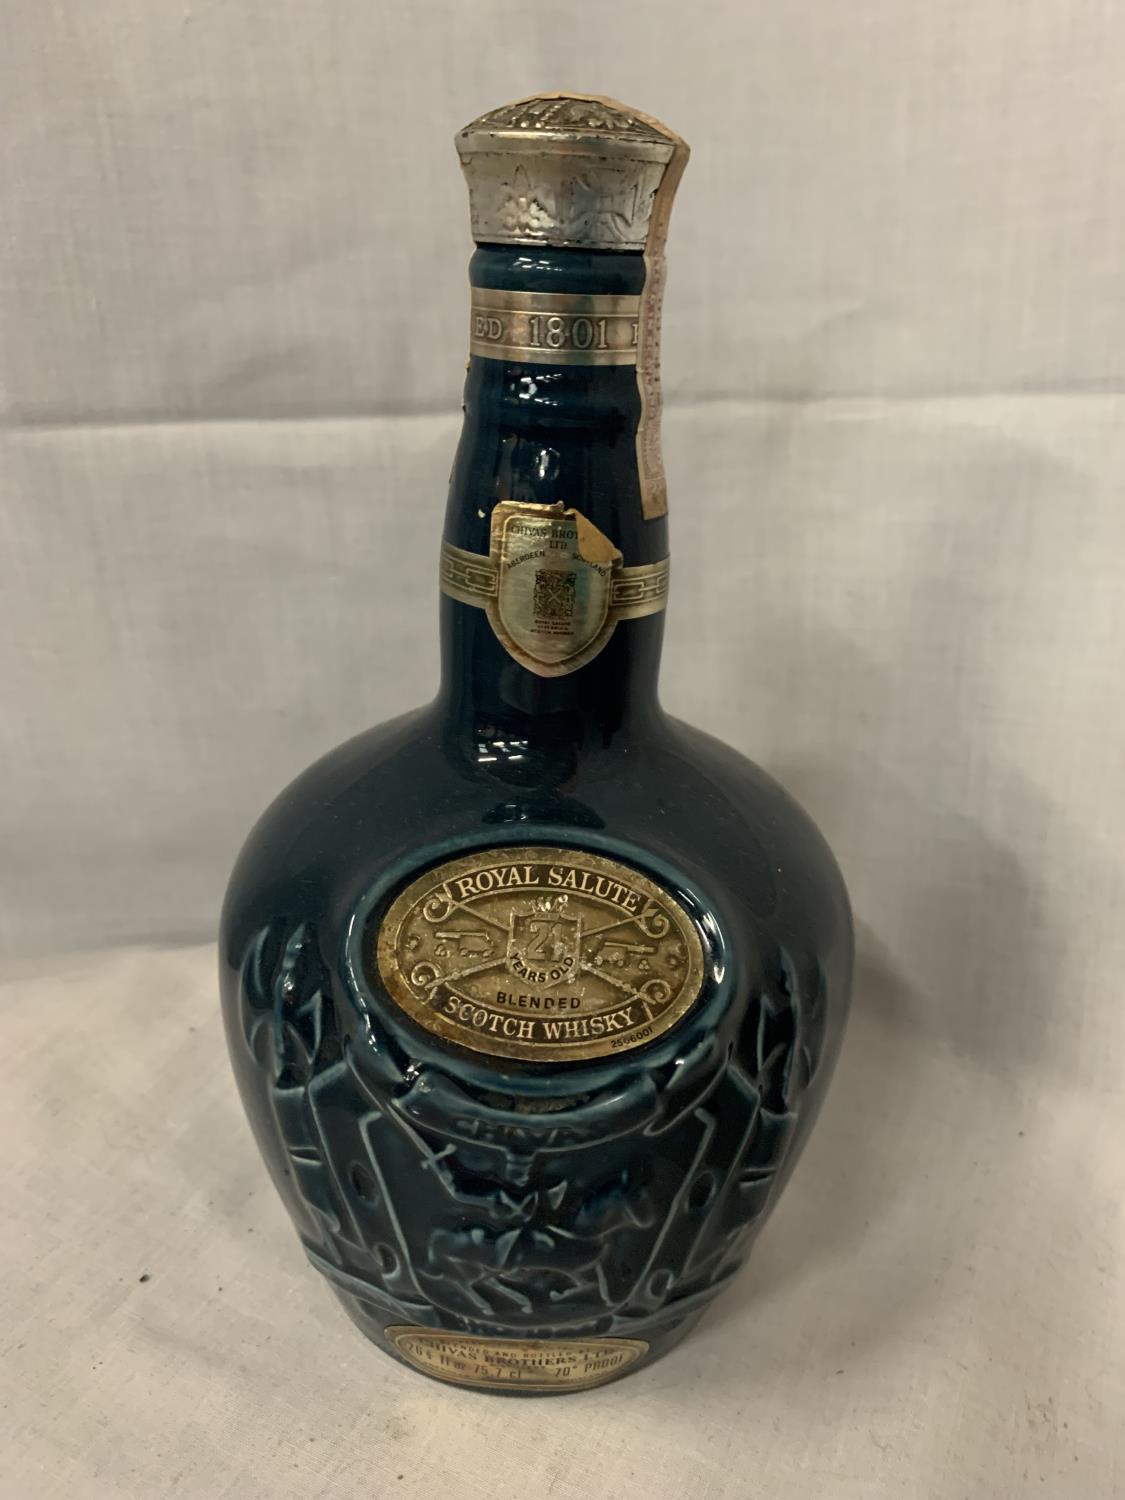 A CHIVAS BROTHERS LTD ROYAL SALUTE 21 YEARS OLD BLENDED SCOTCH WHISKY IN A BLUE SPODE LIQUOR